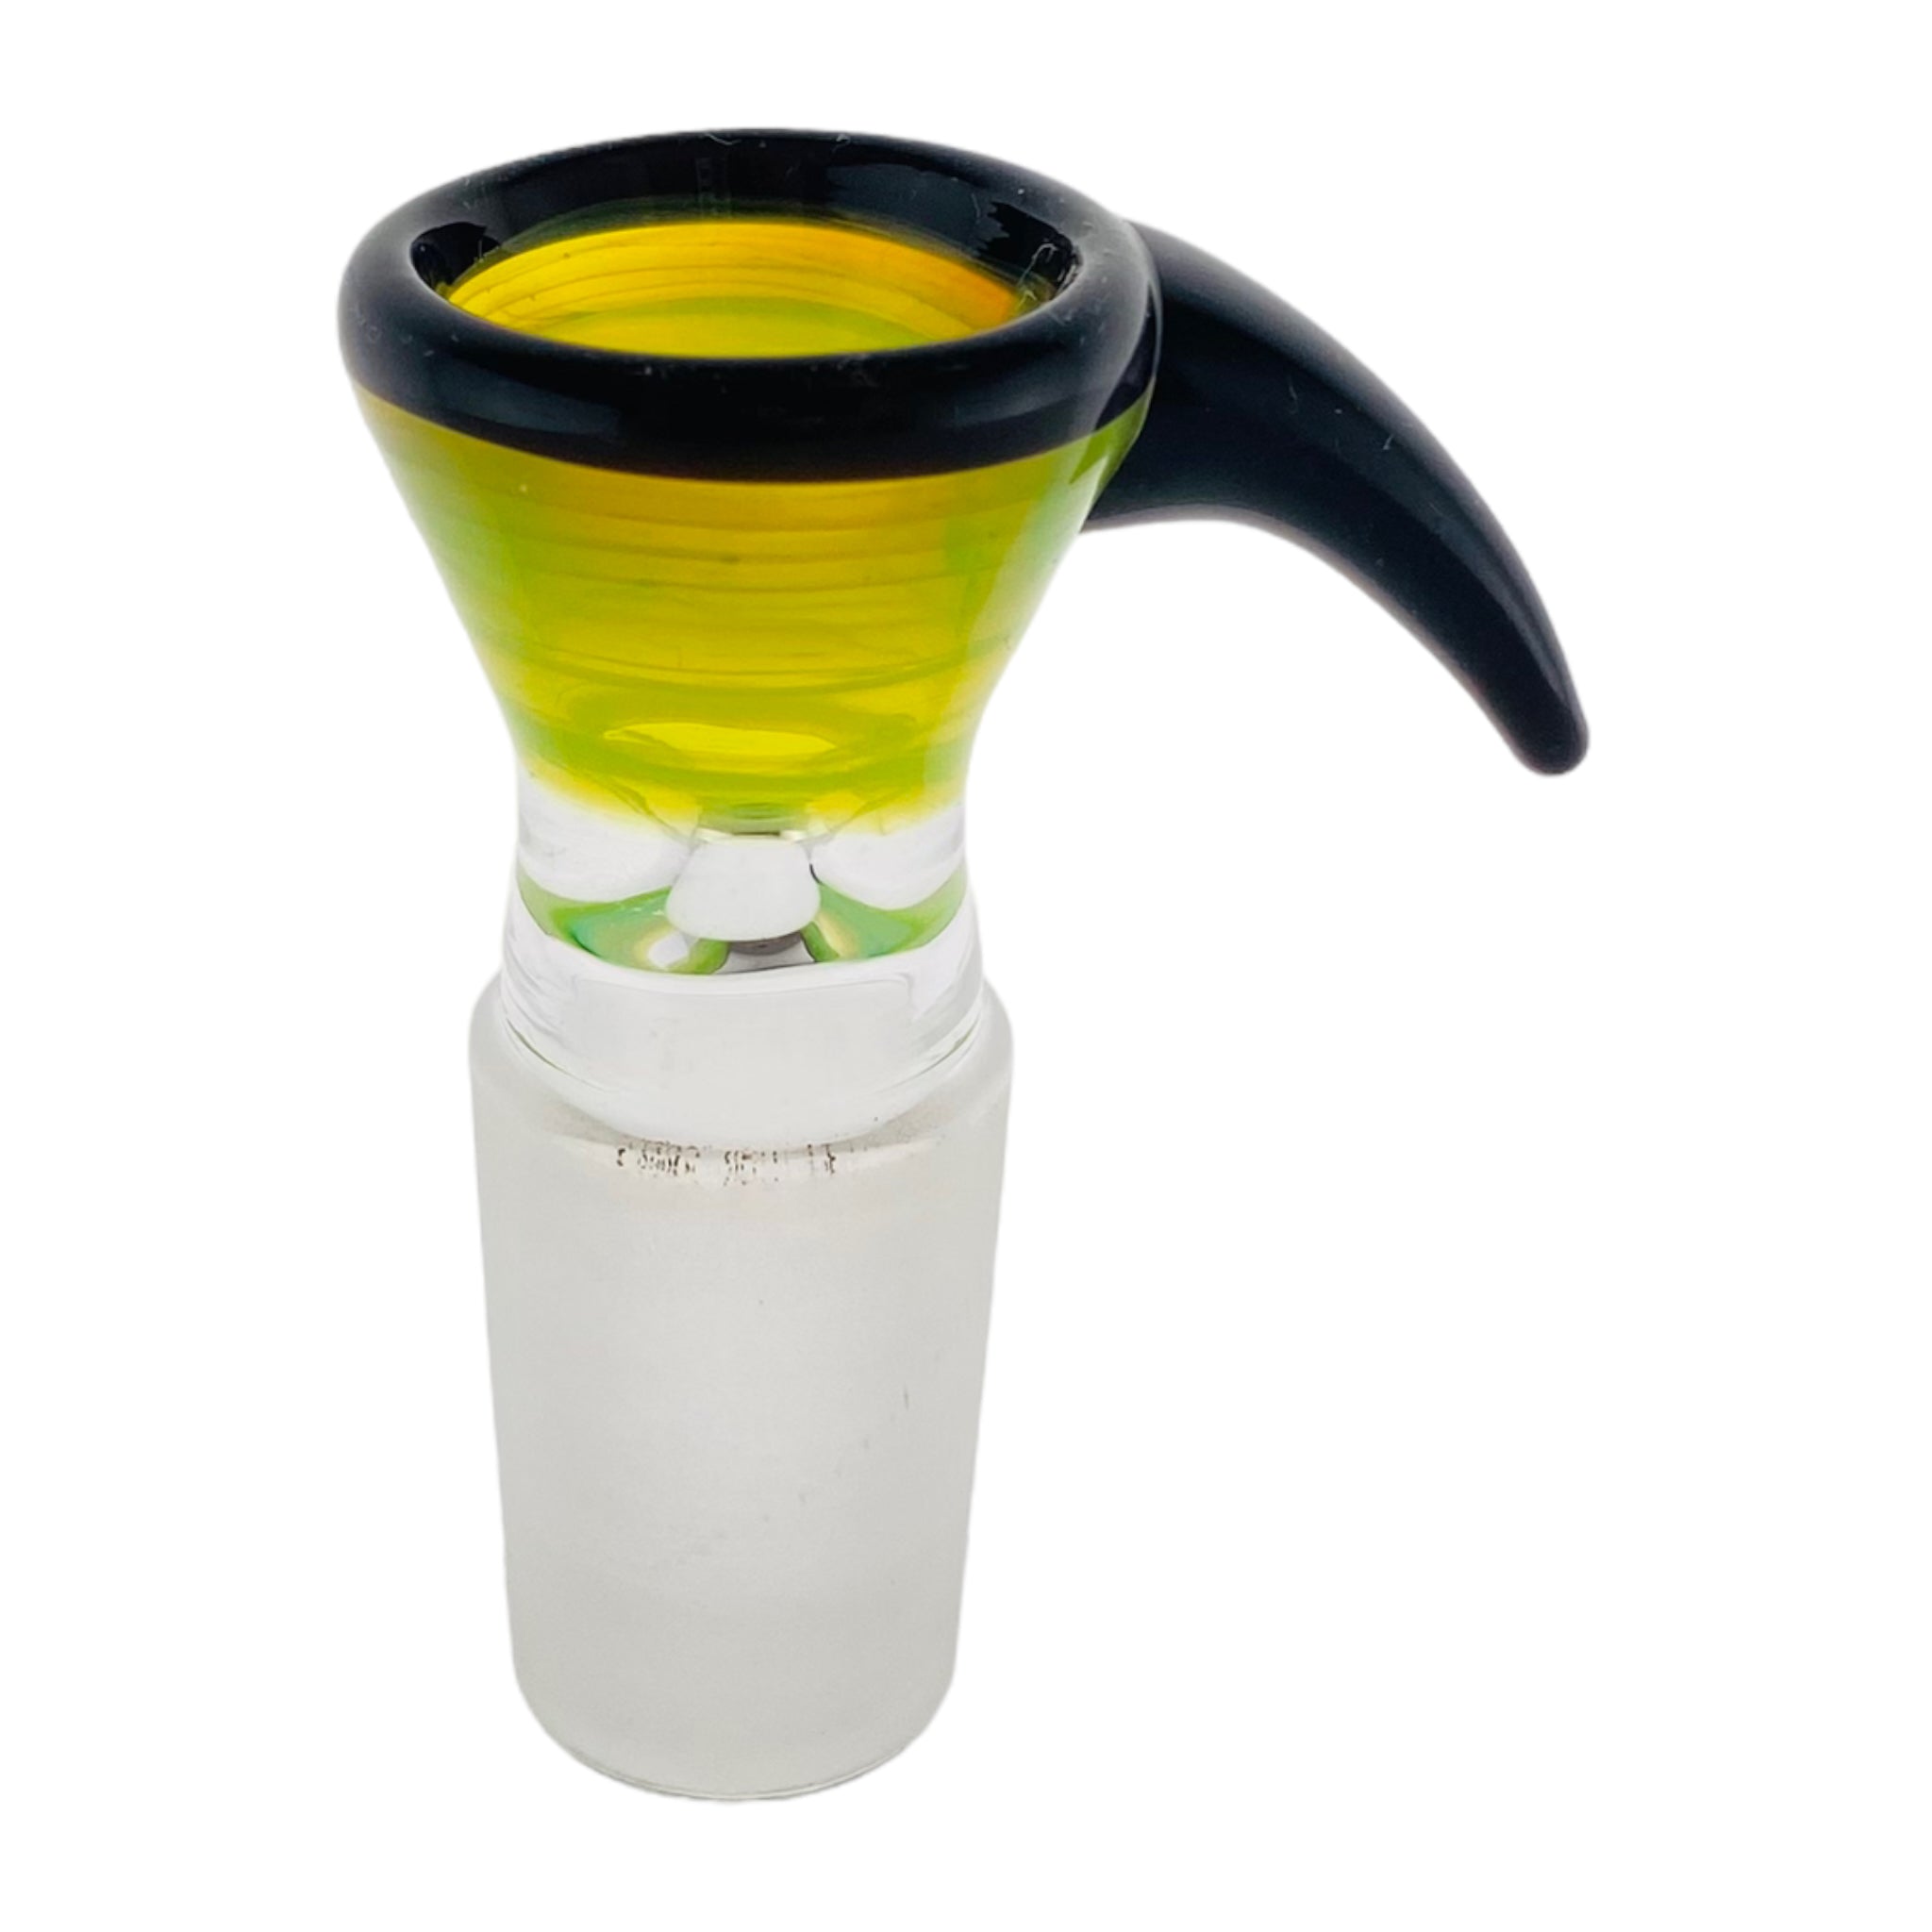 18mm Flower Bowl - Green Funnel With Black Handle Bong Bowl Piece